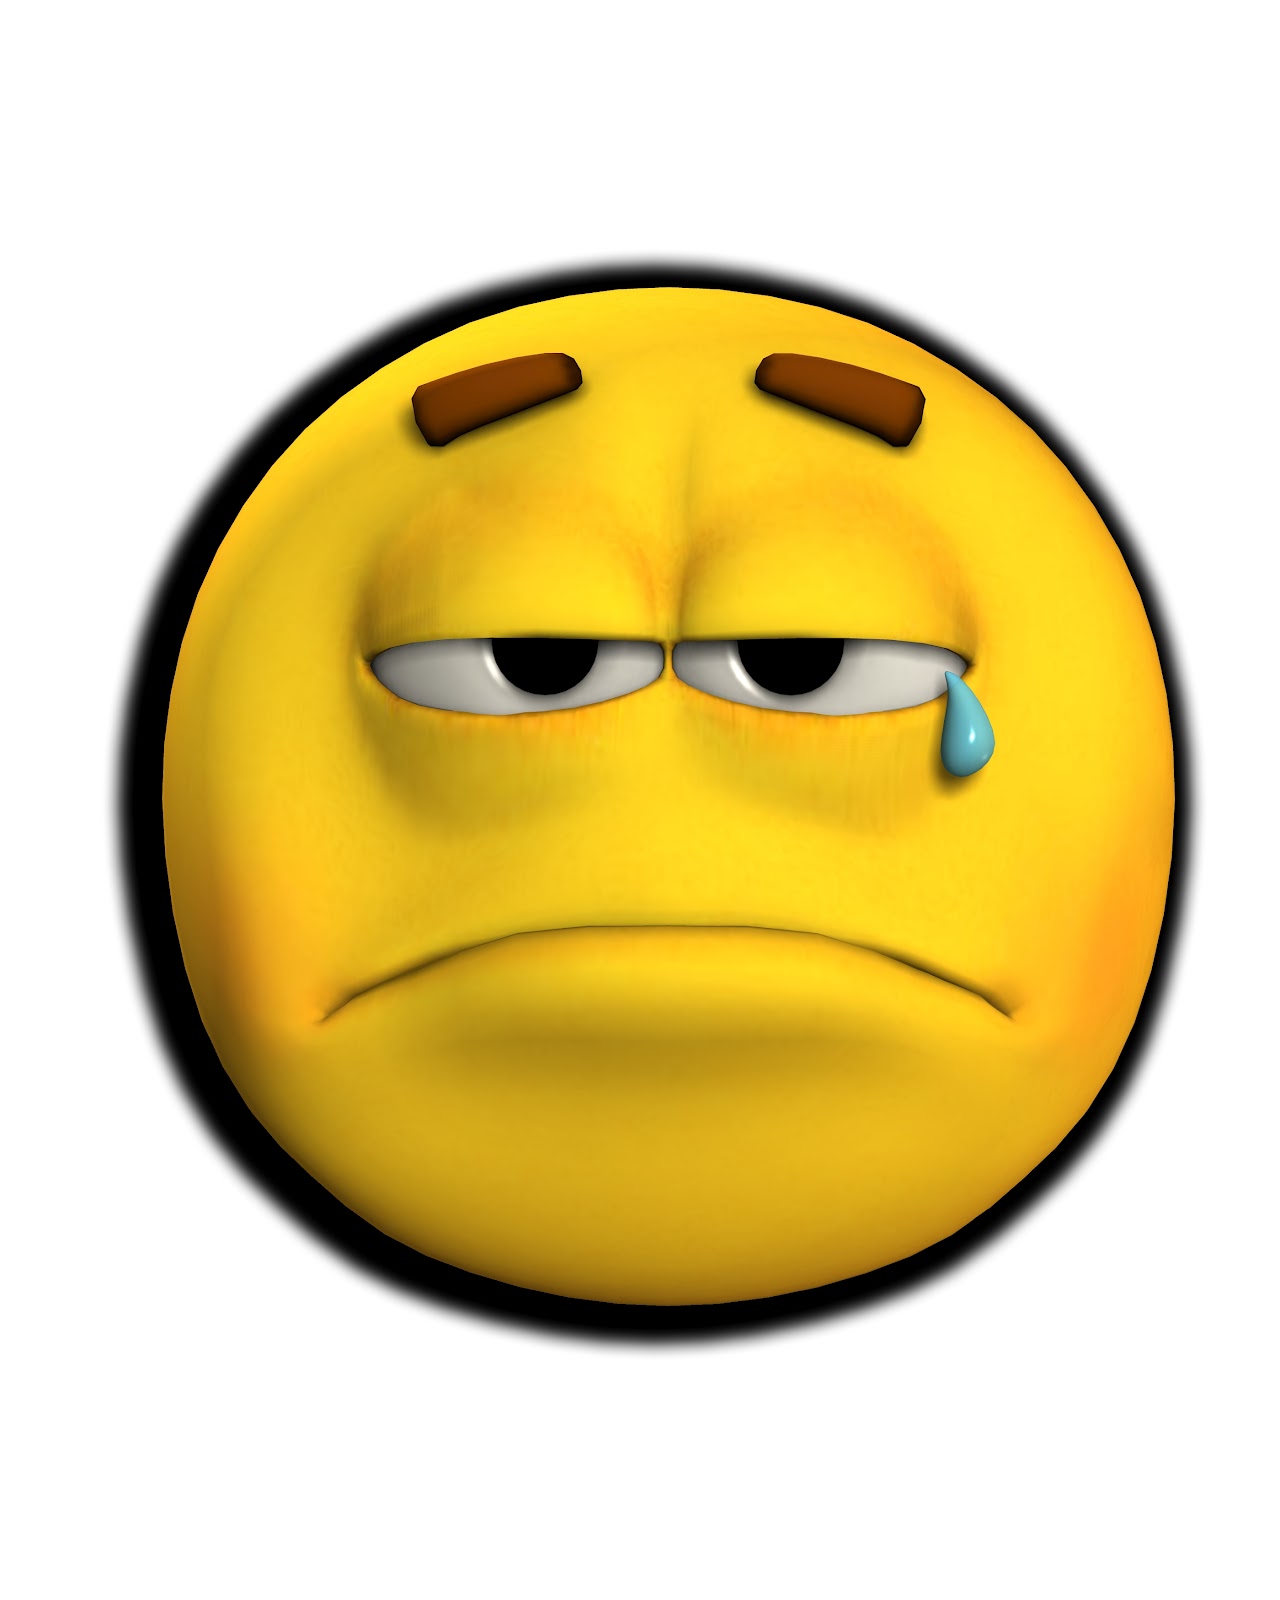 Sad Faces Animated - ClipArt Best